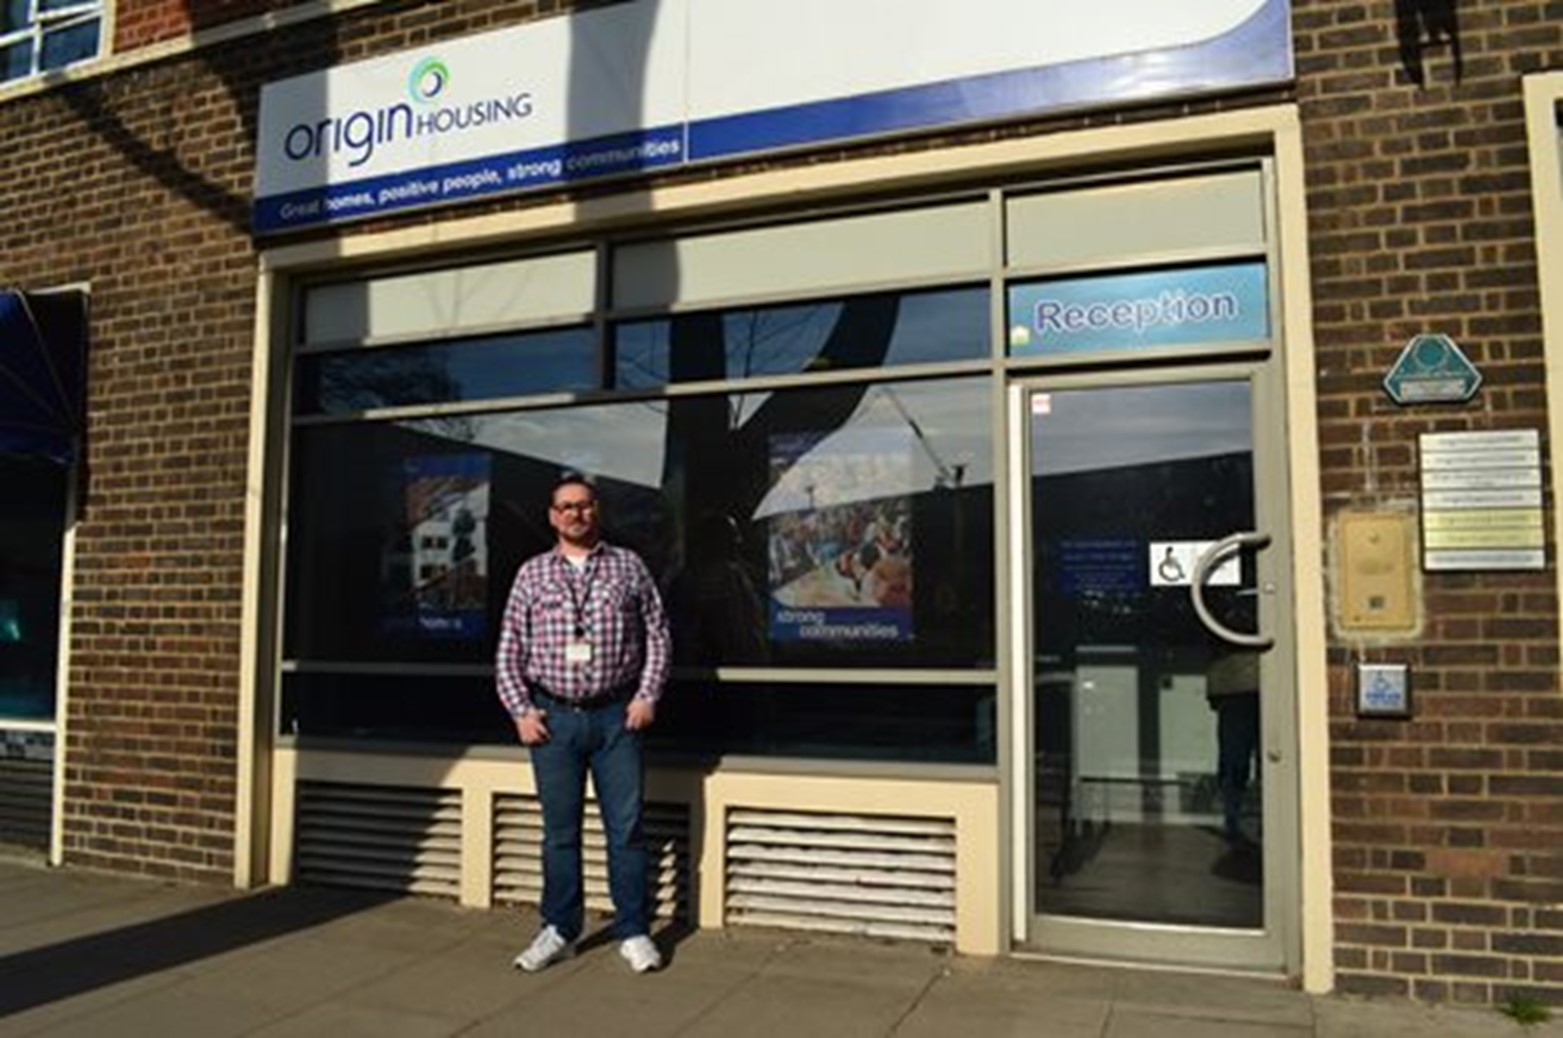 Nick from Stonewall Housing outside Origin office